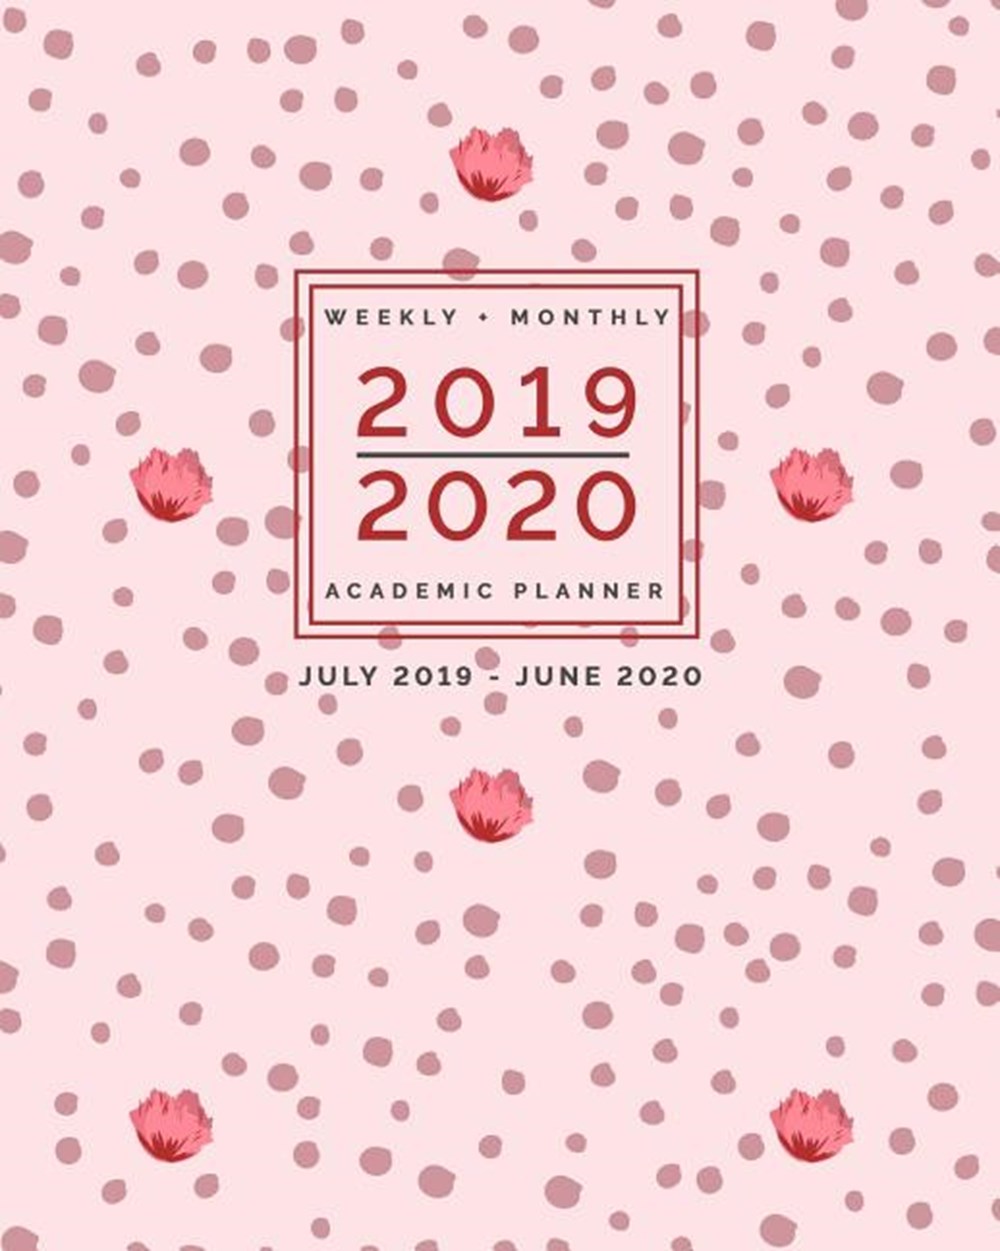 2019 - 2020 - Weekly + Monthly Academic Planner - July 2019 - June 2020 Pink and Mauve Tiny Florals: